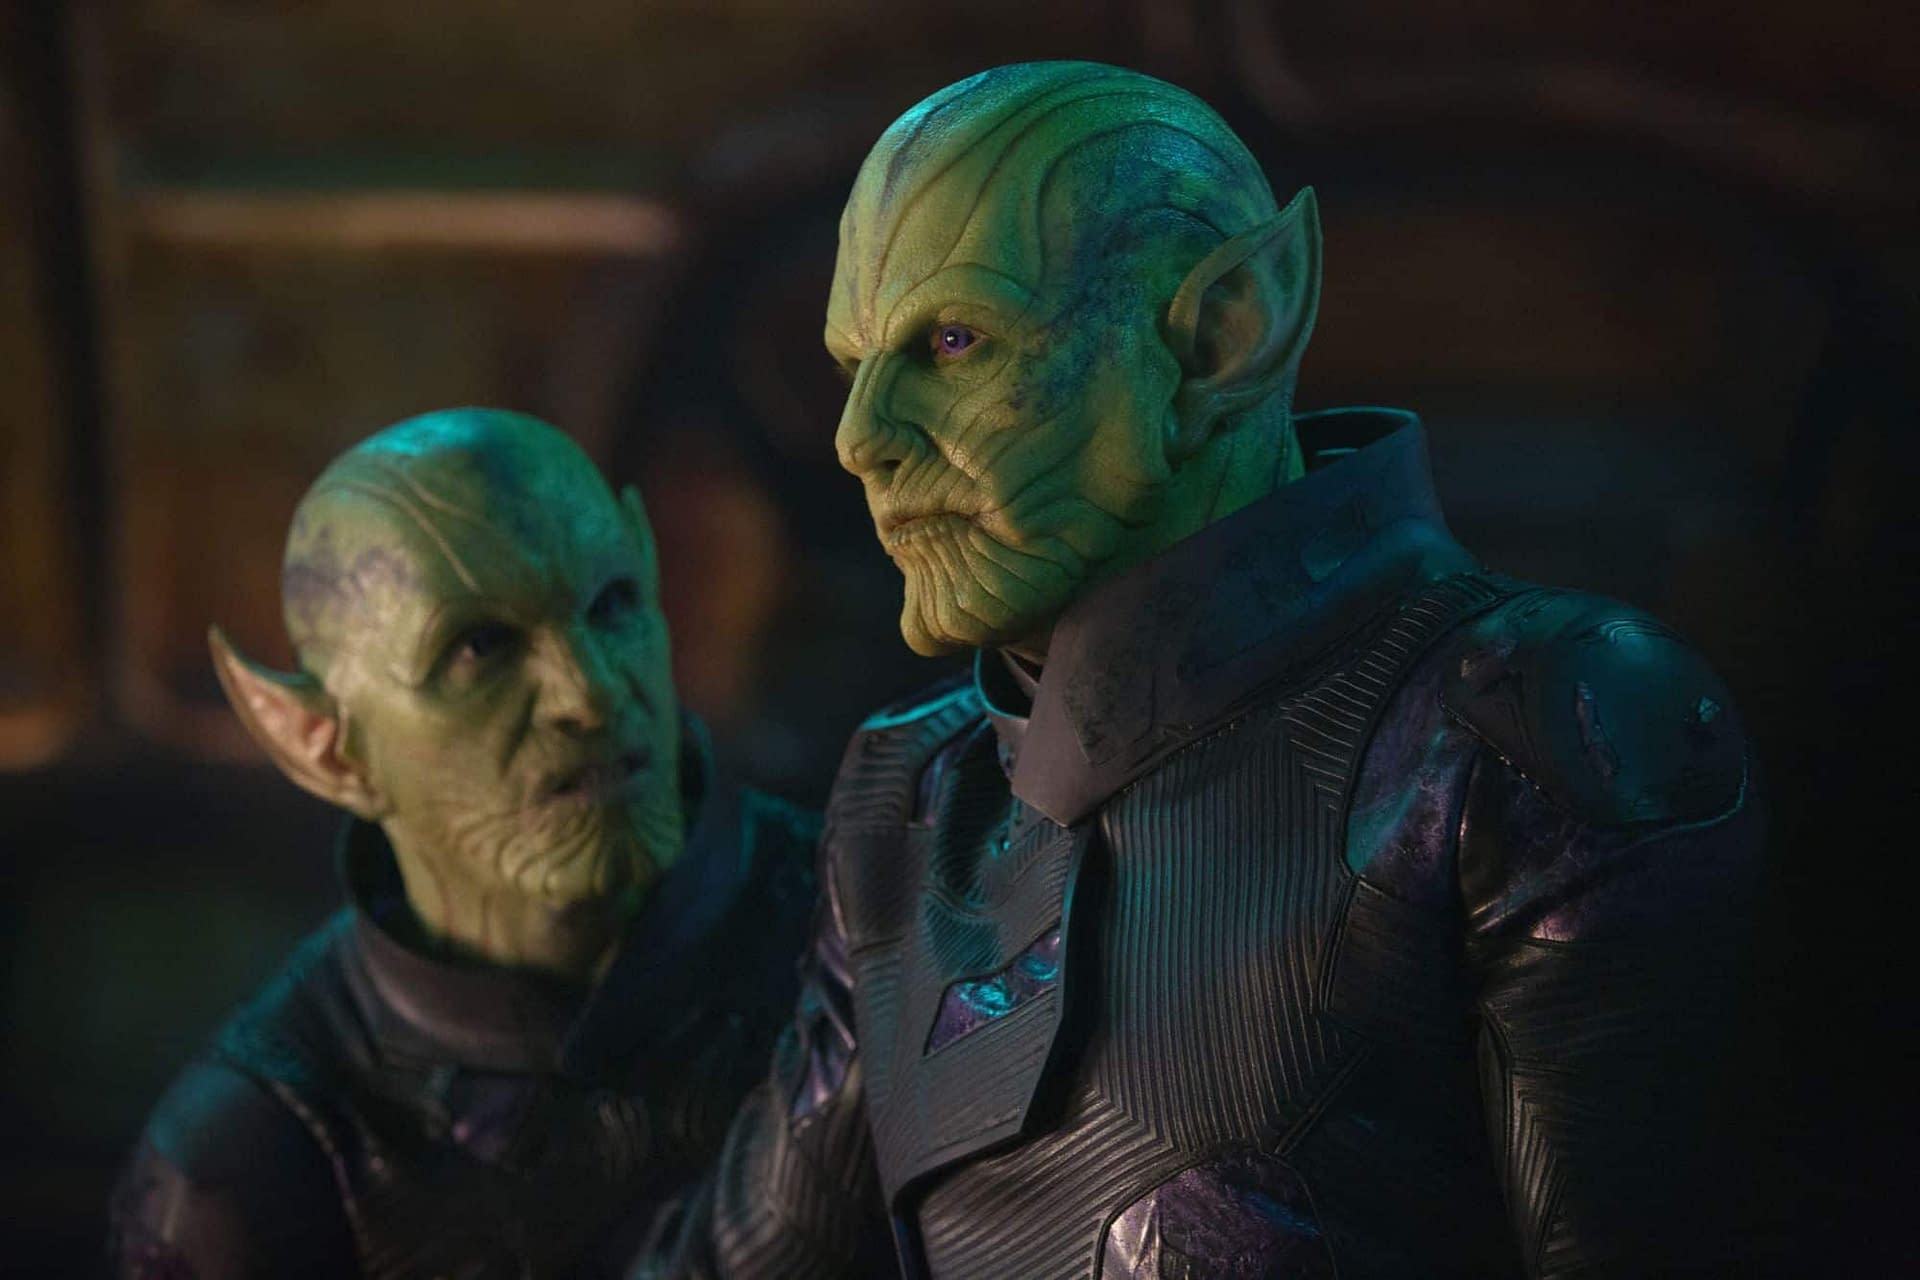 [SPOILERS] The Future of the Skrulls in the Marvel Cinematic Universe